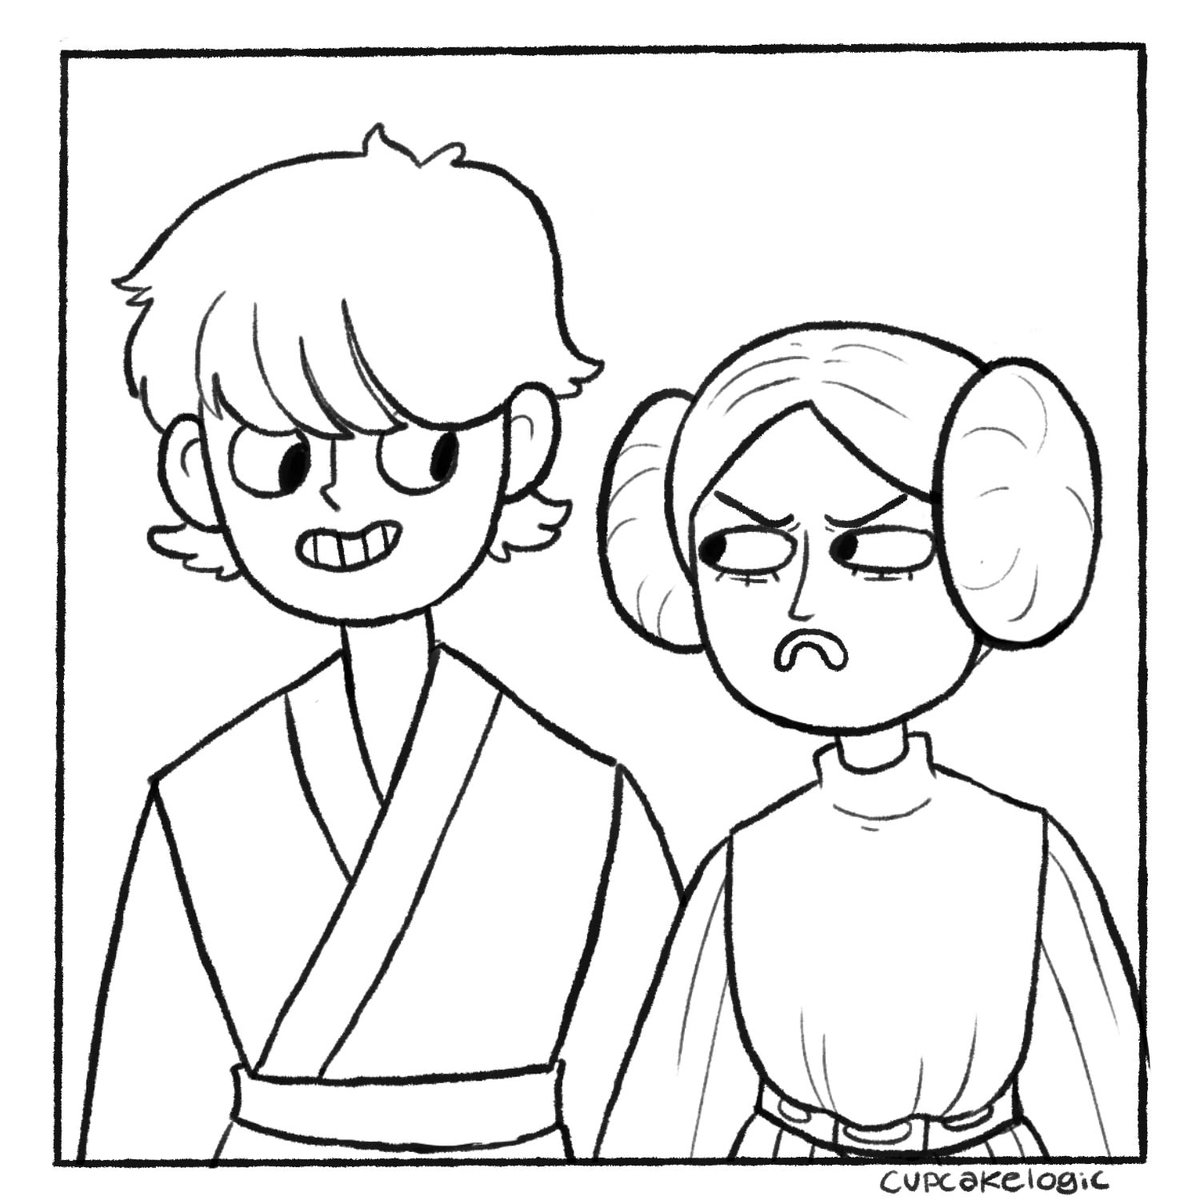 if you knew me when i drew only star wars comics you know too much 